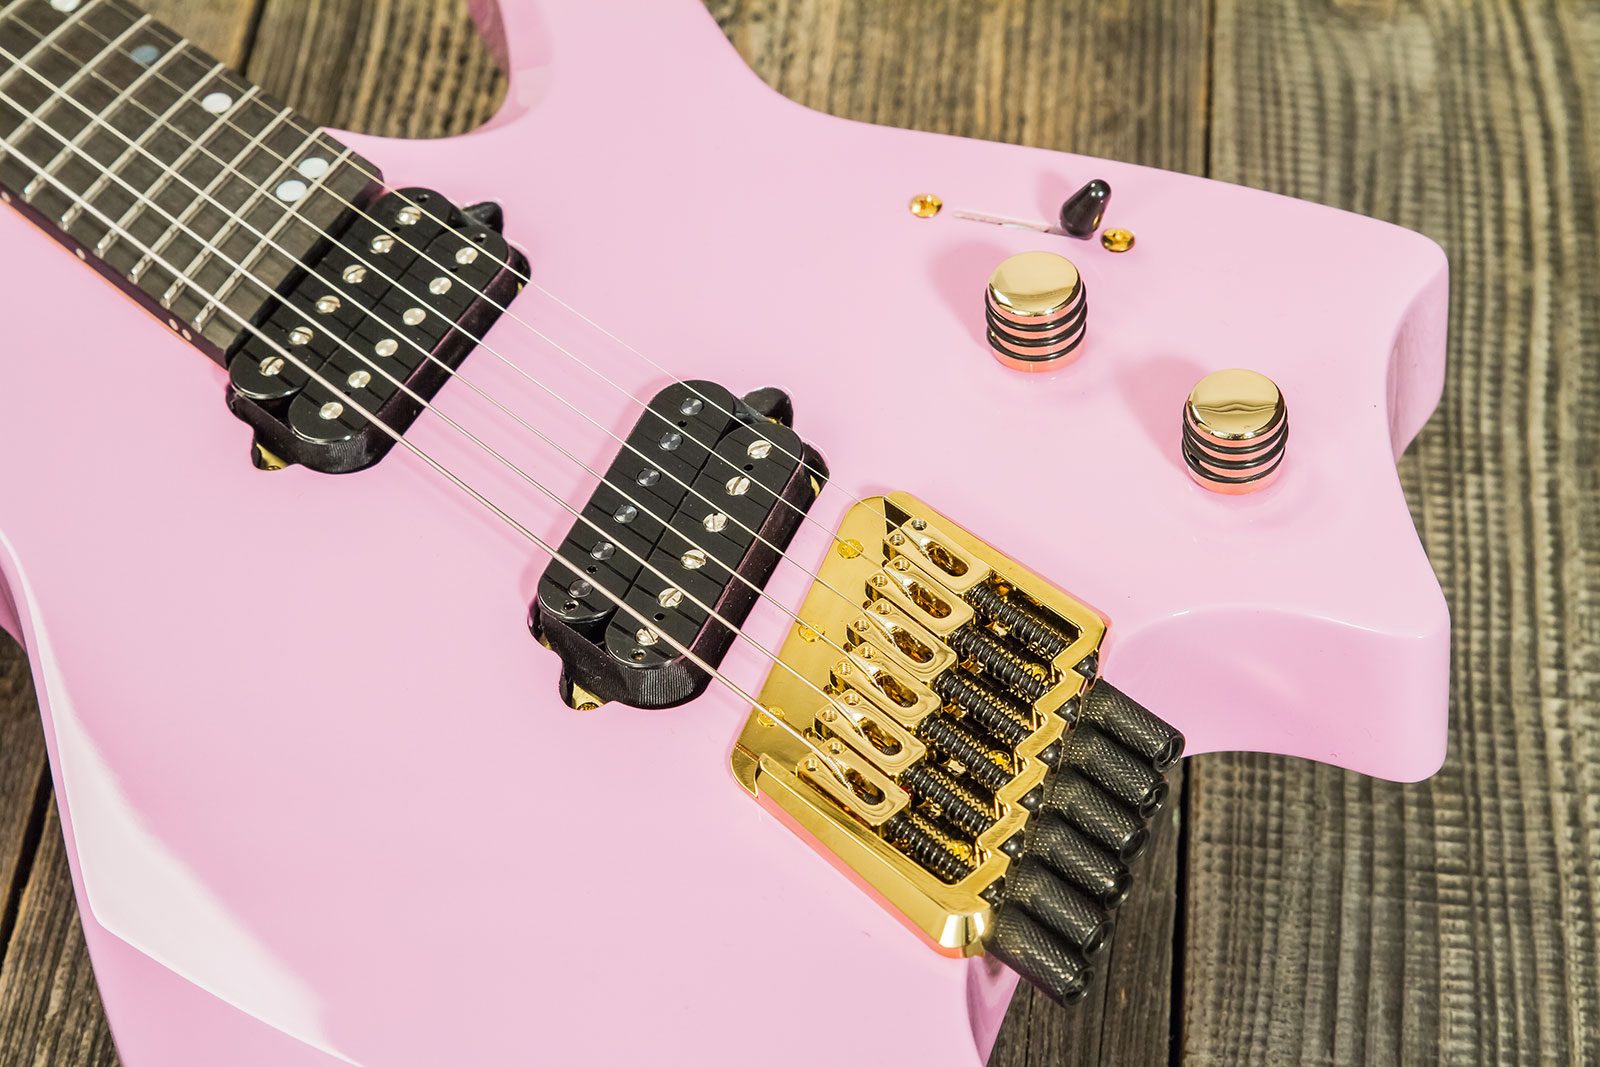 Ormsby Goliath Headless Gtr Run 14c Multiscale 2h Ht Eb - Shell Pink - Multi-Scale Guitar - Variation 3